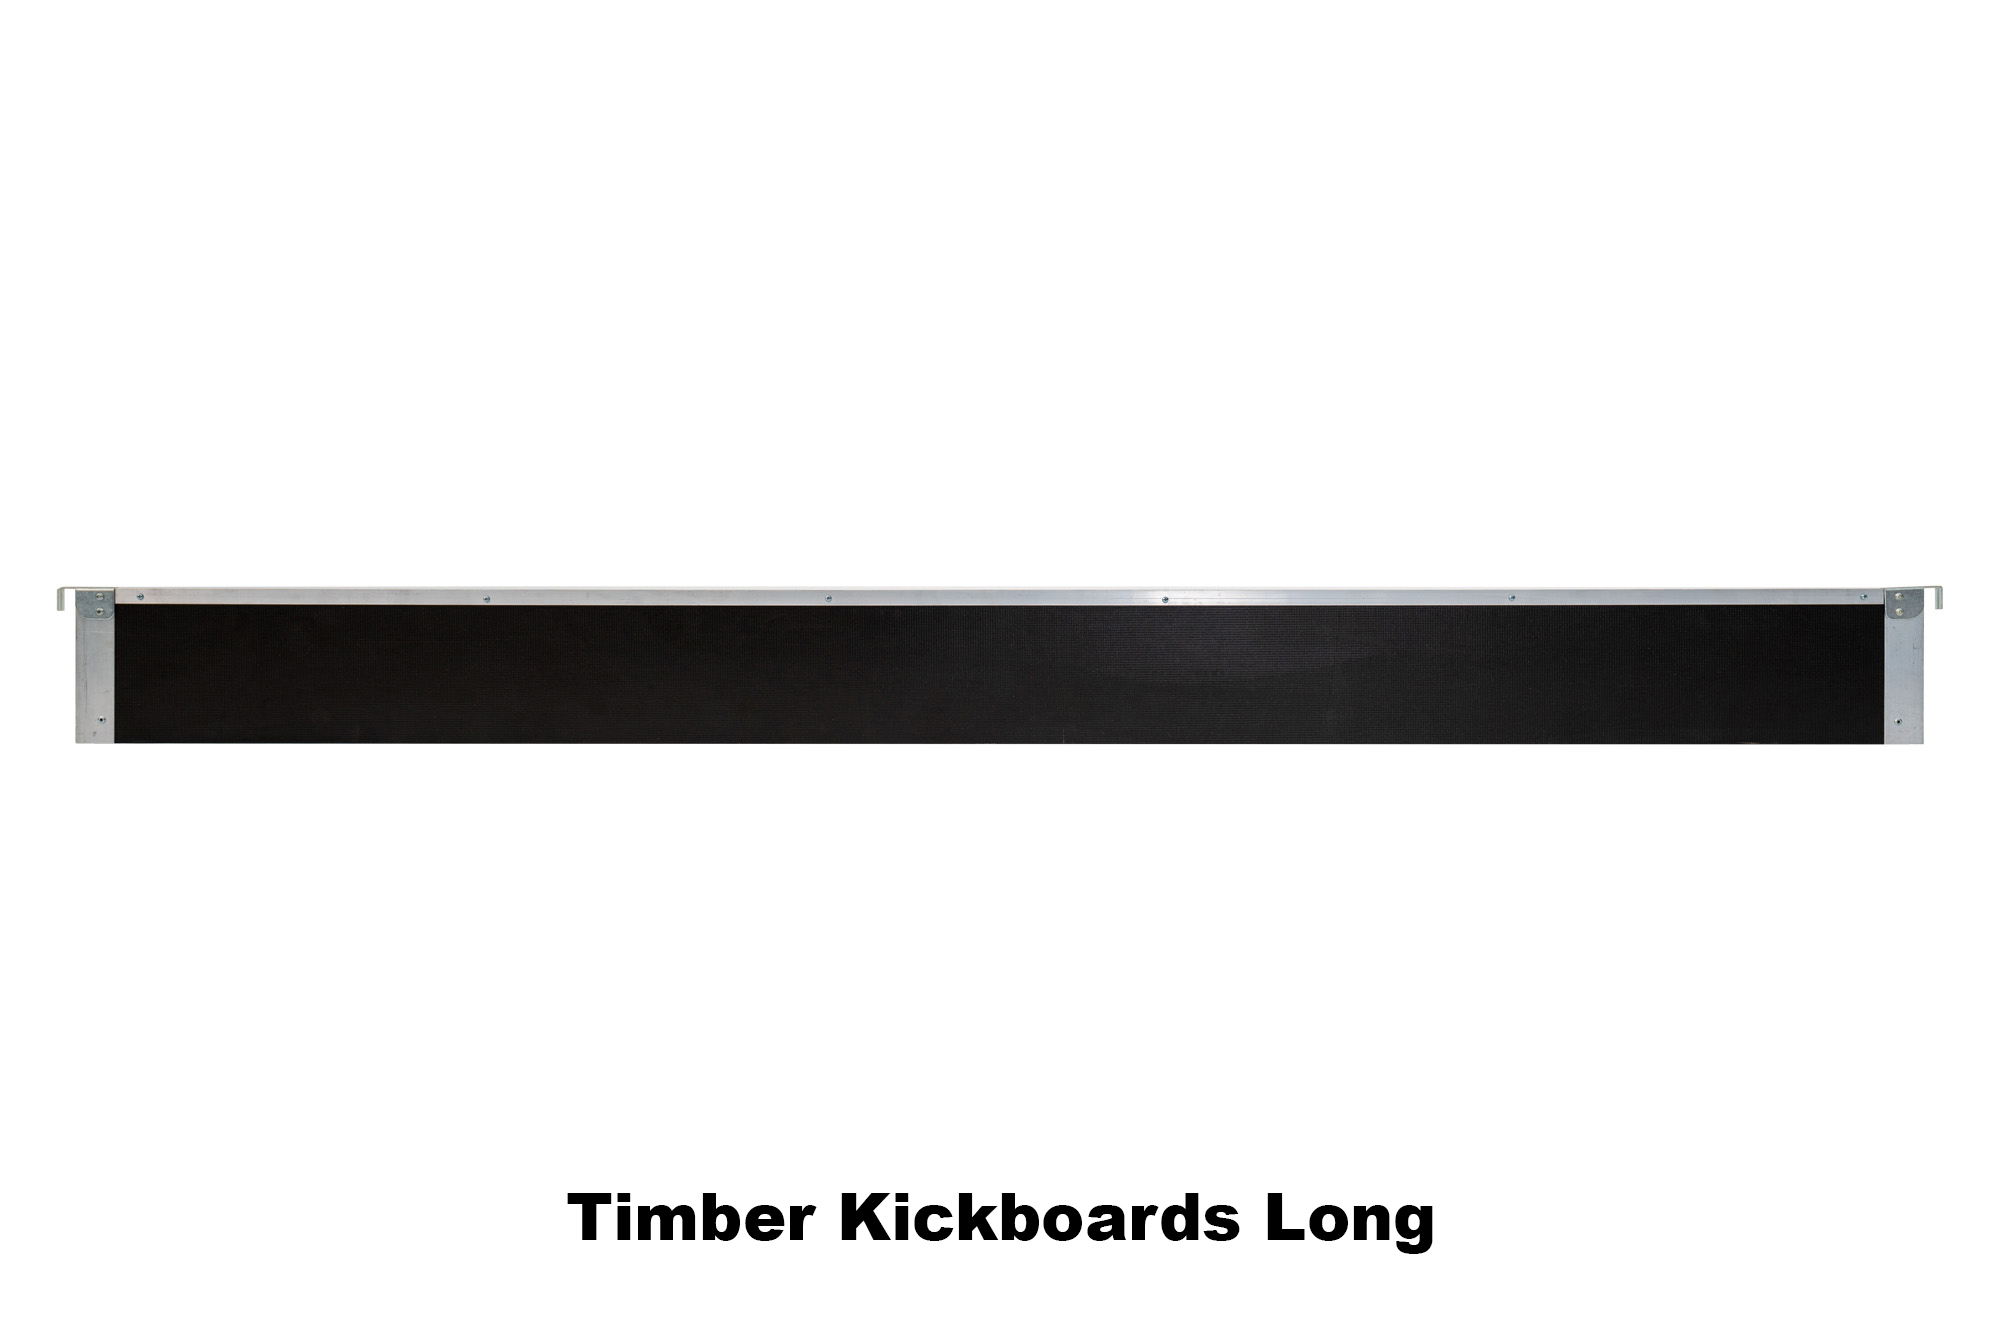 cgh_Product_16-Timber-Kickboards-Long-1